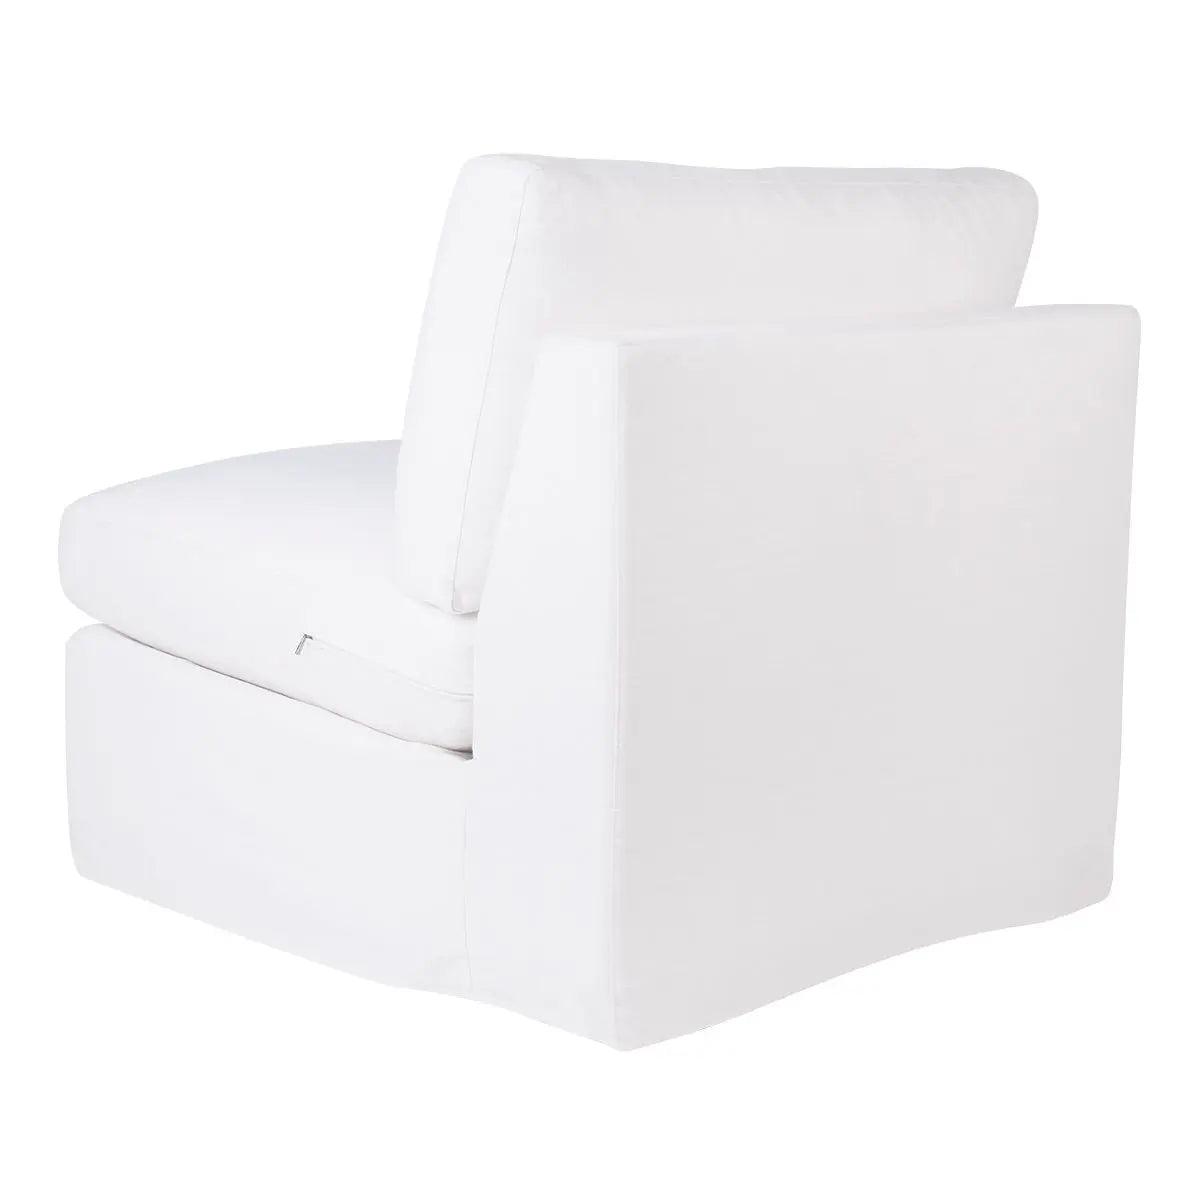 Cafe Lighting & Living Birkshire Slip Cover Occasional Chair - White Linen - Occasional Chair324569320294120910 2